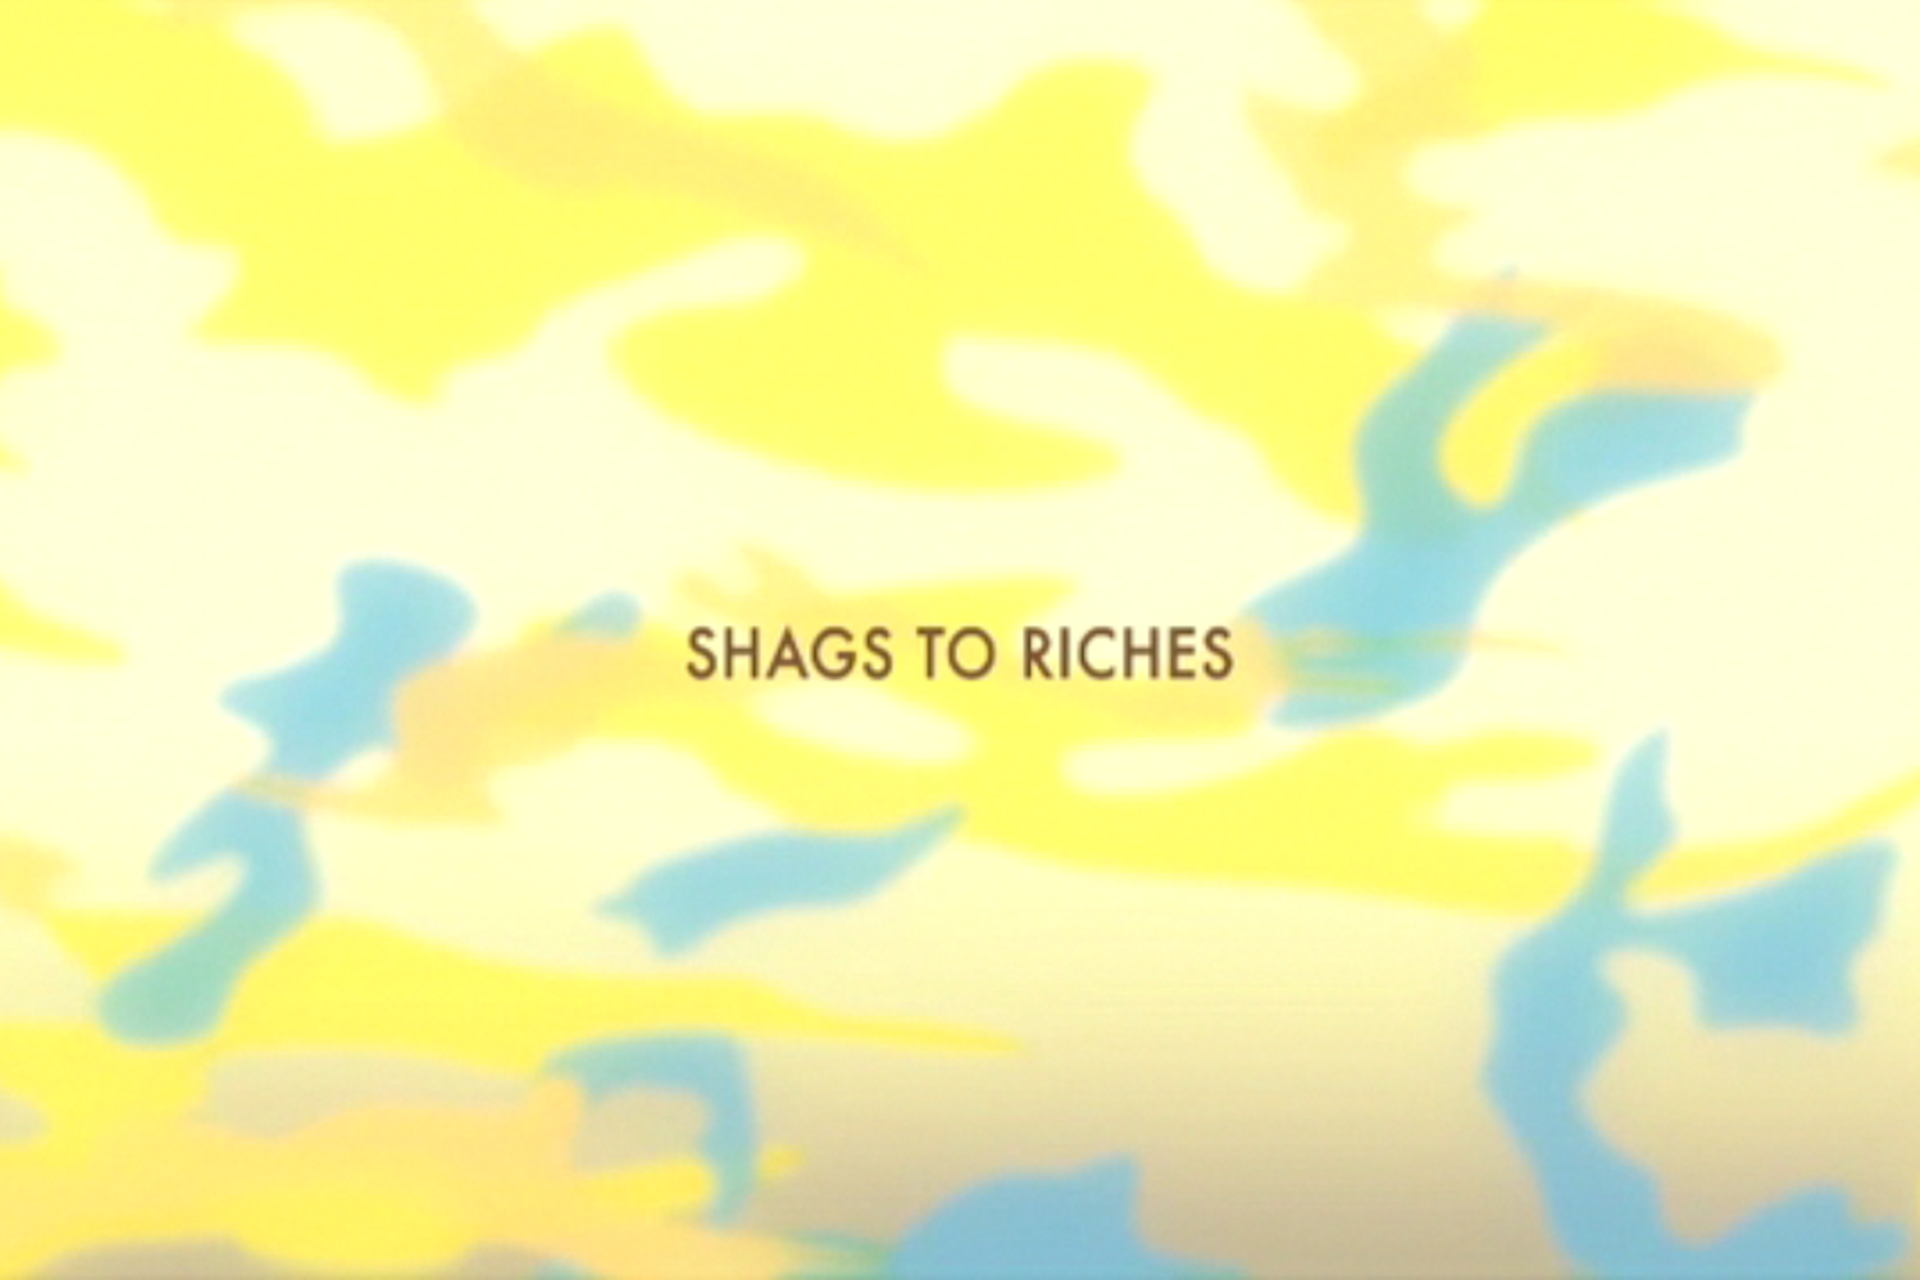   Shaggy &amp; Scooby-Doo Get a Clue  - Season 1, Episode 1: "Shags to Riches" - Title Animation by Unknown 